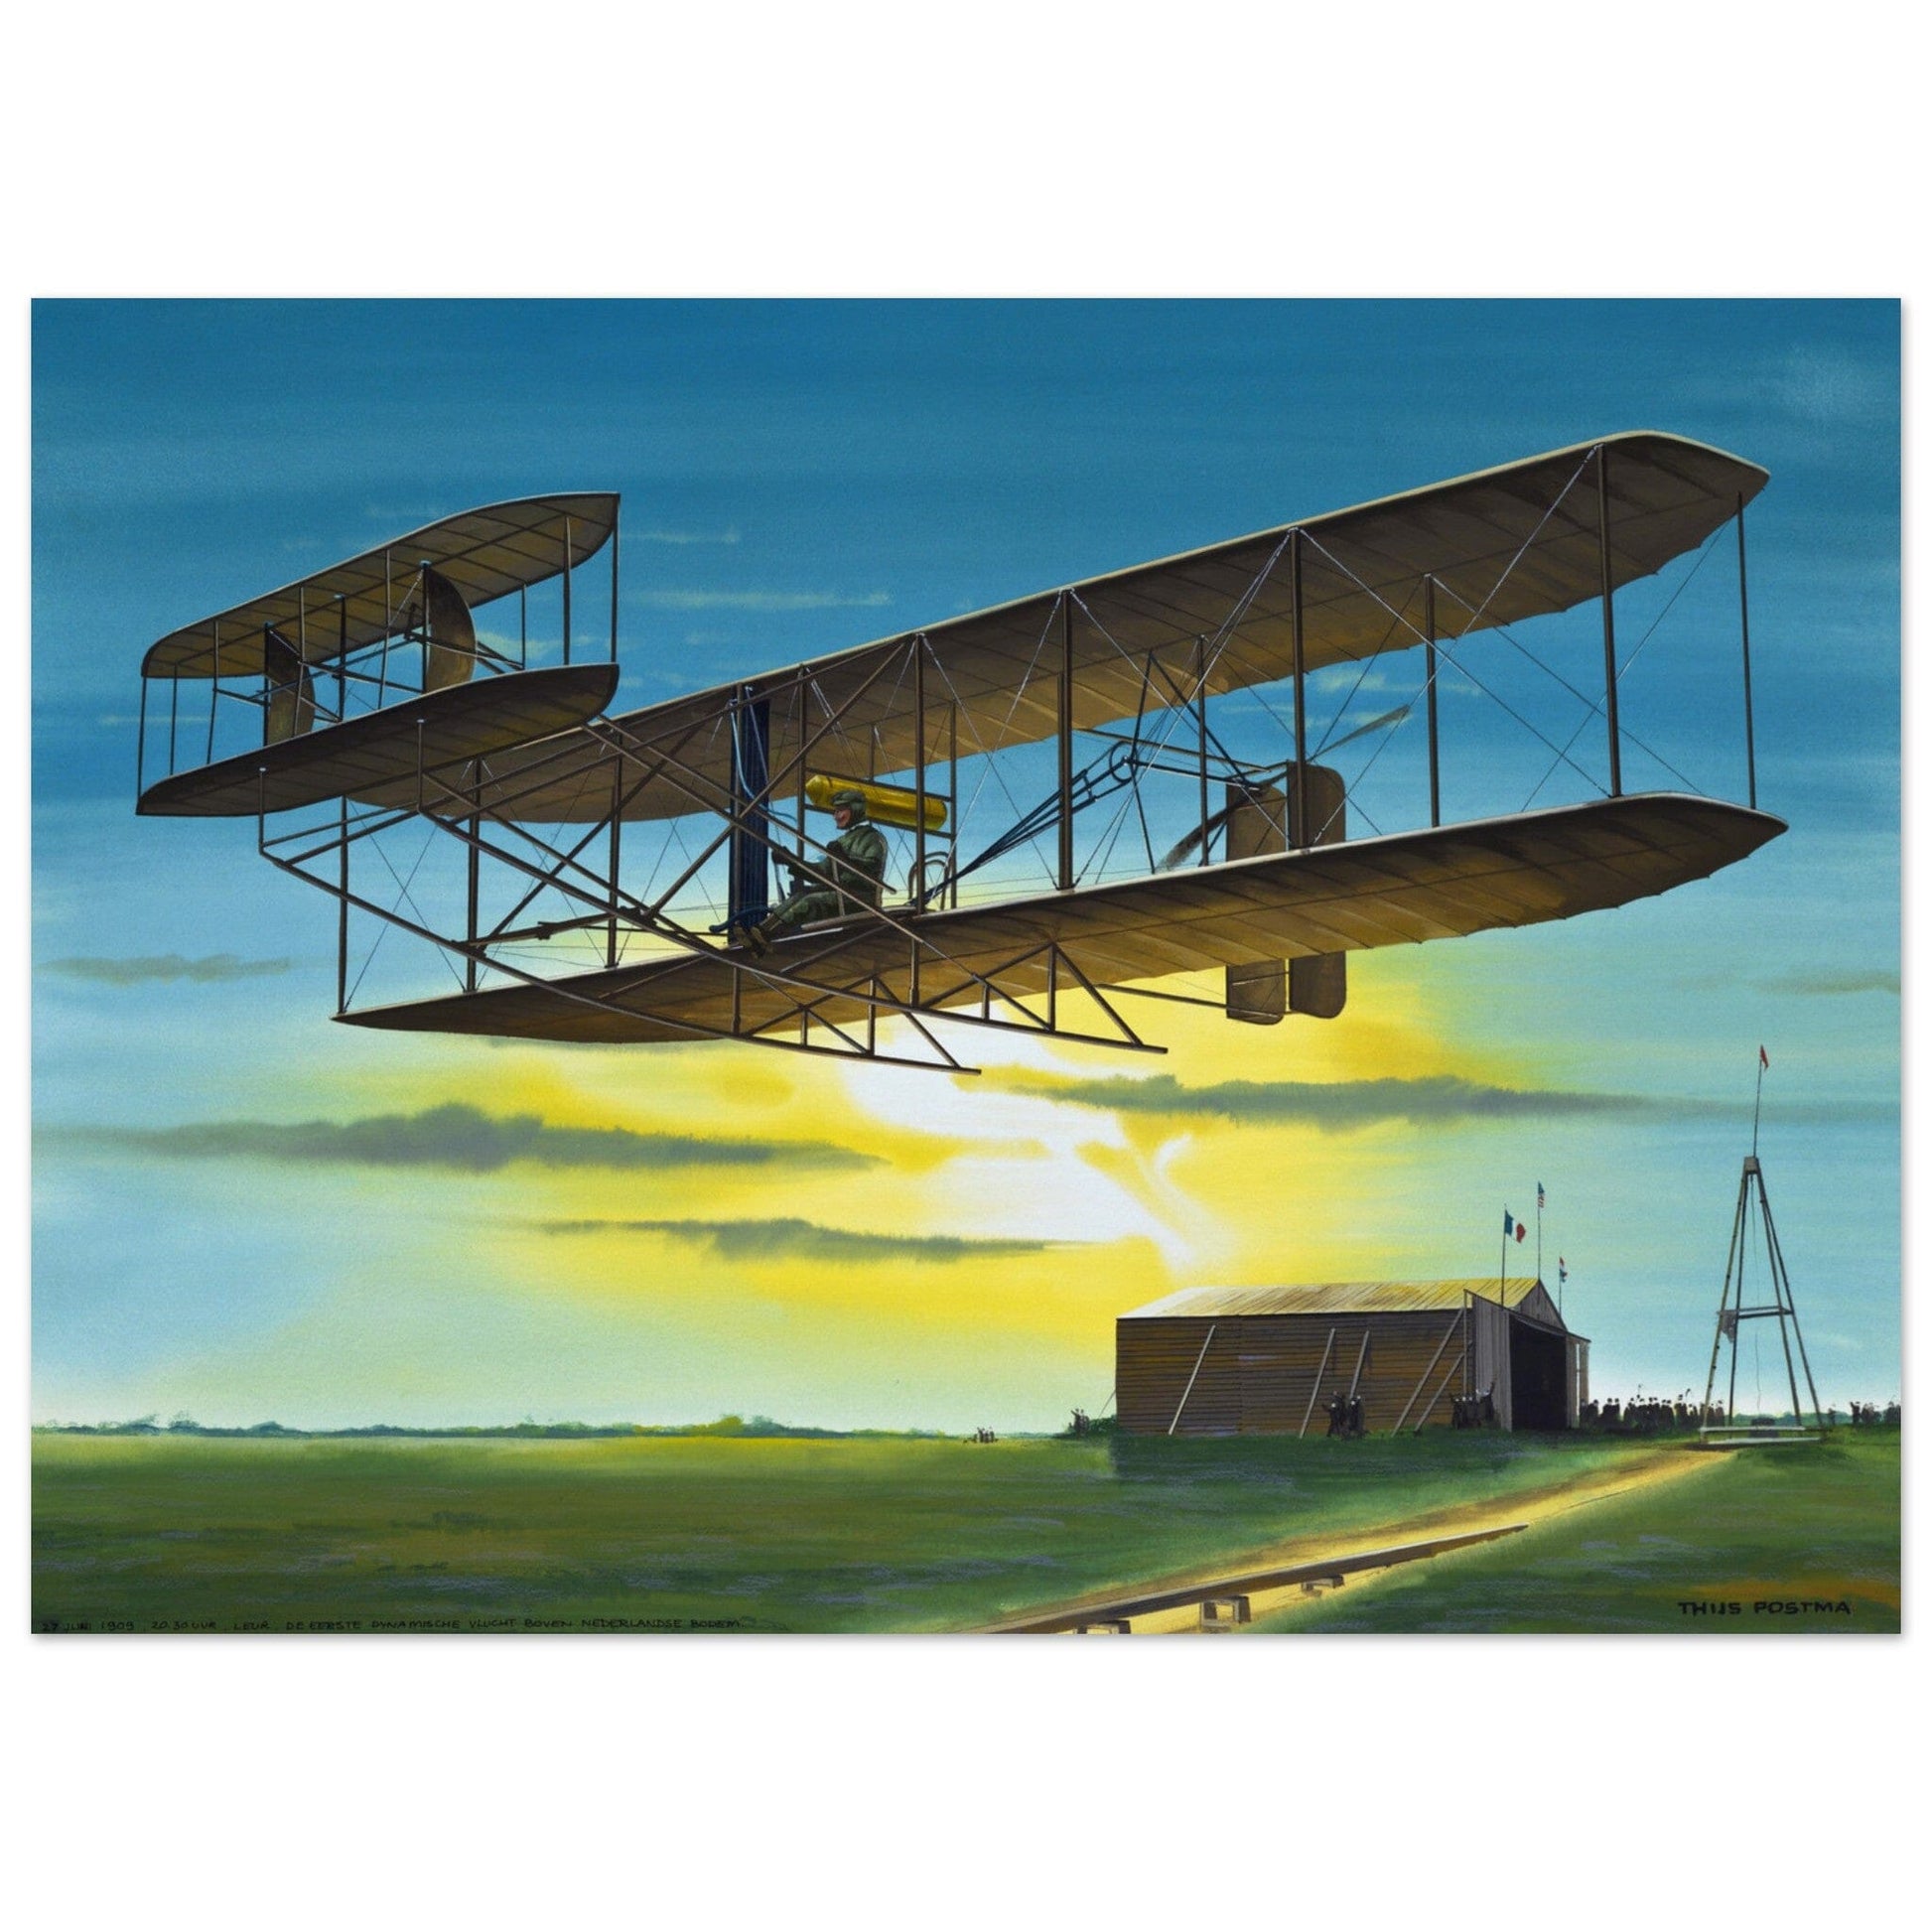 Thijs Postma - Poster - Wright Flyer First Flight Over The Netherlands 1909 Poster Only TP Aviation Art 50x70 cm / 20x28″ 